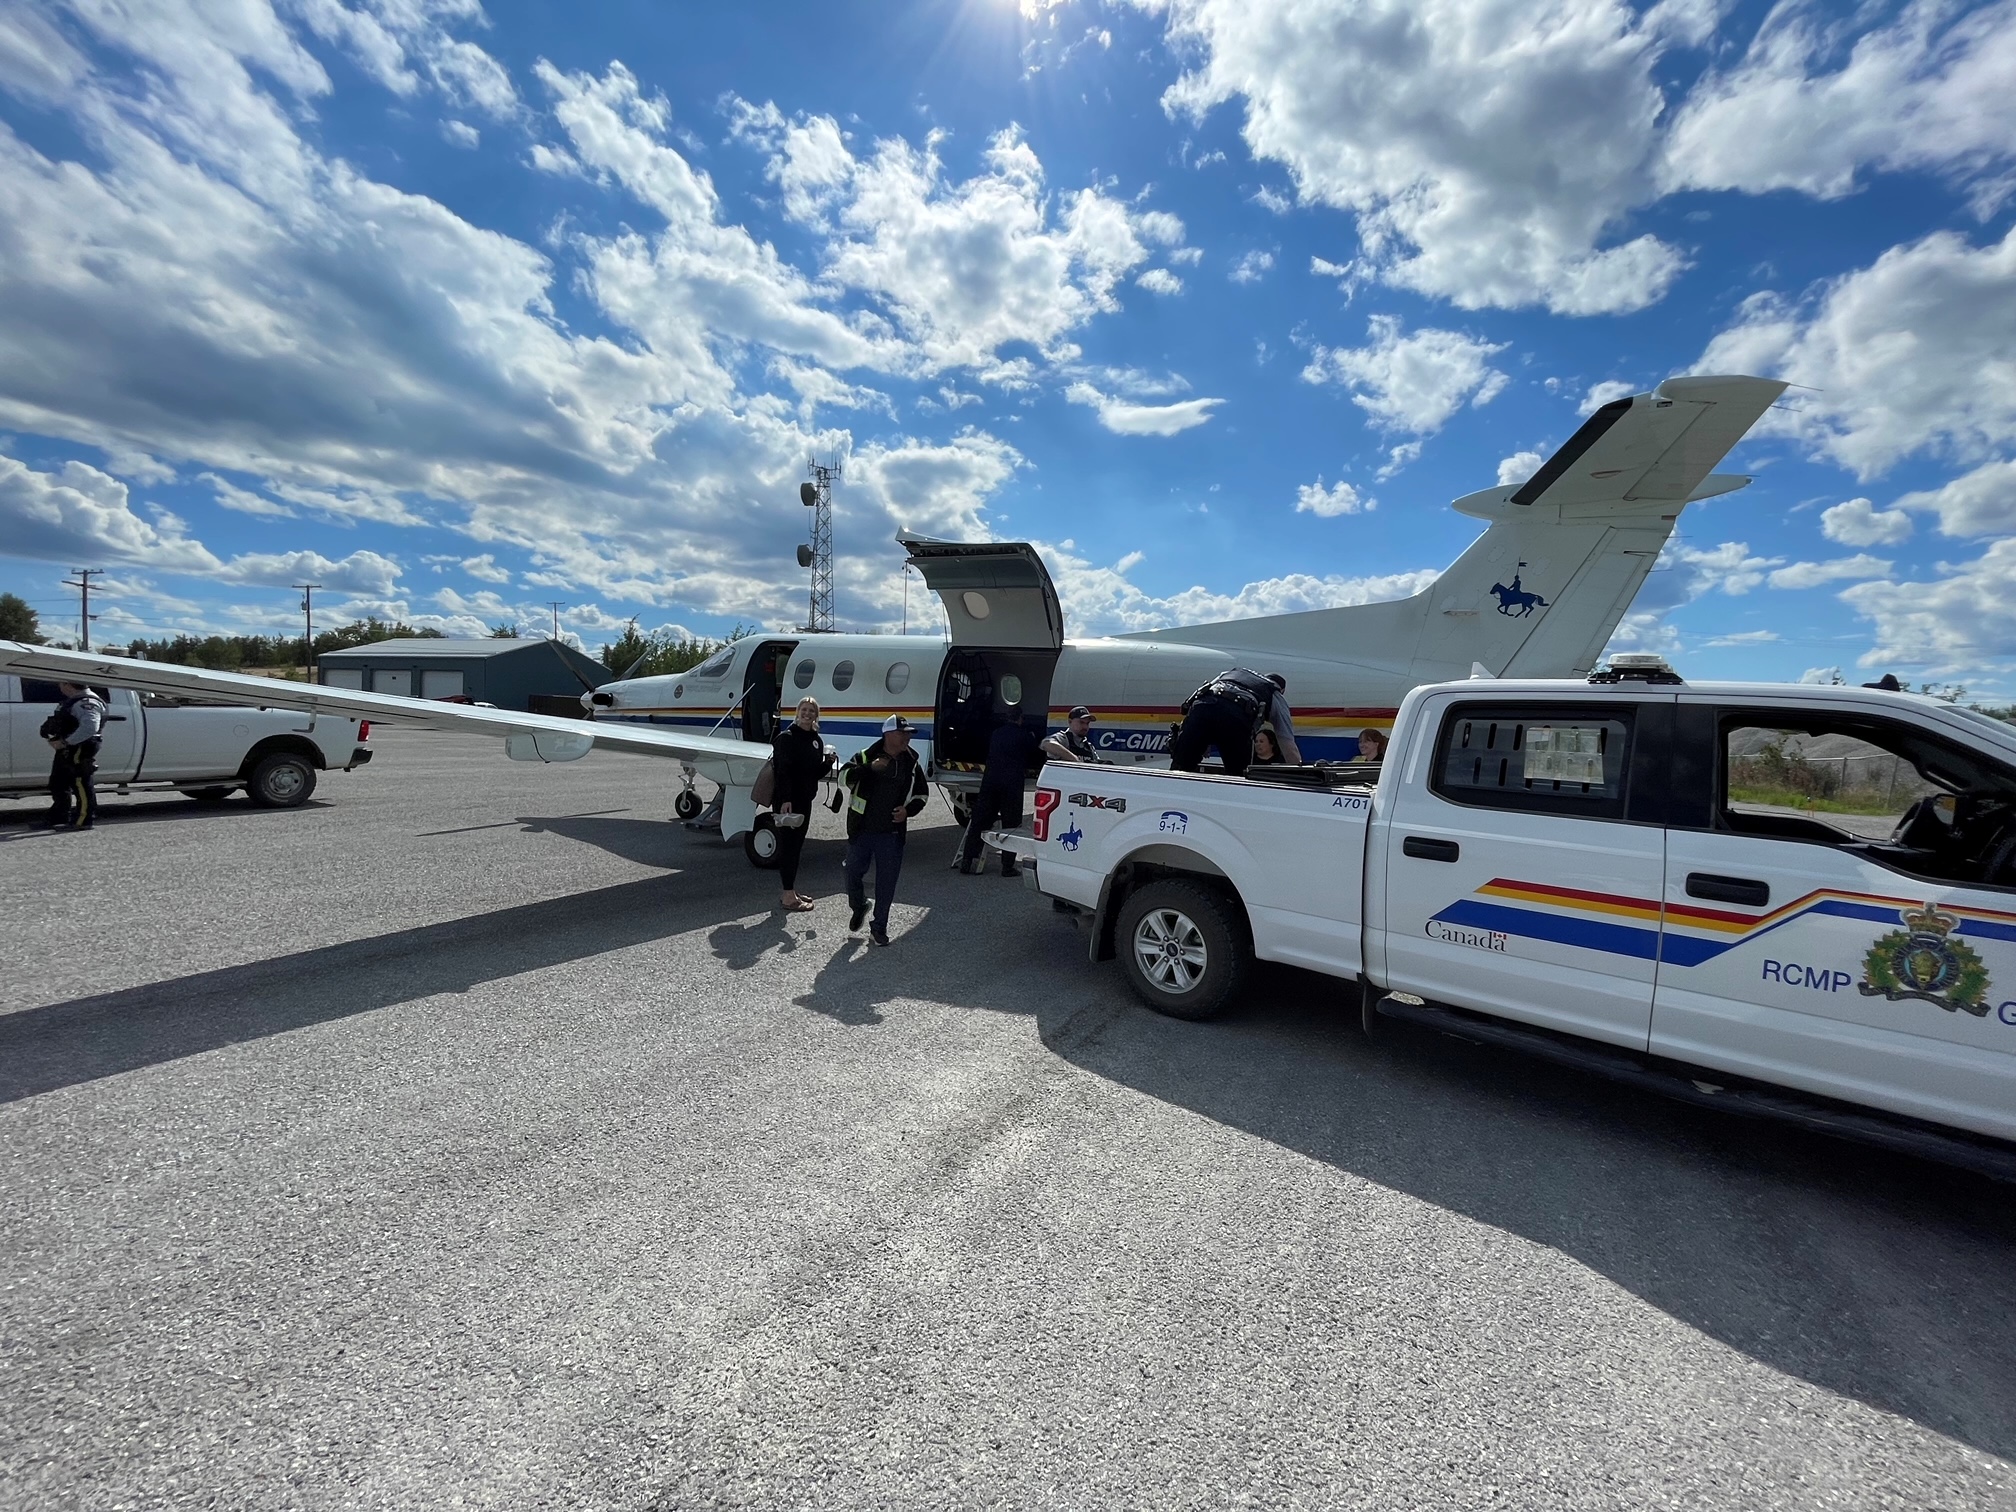 Some northern RCMP detachments are not accessible by road so Arndt flies into some communities like Fond-du-Lac.